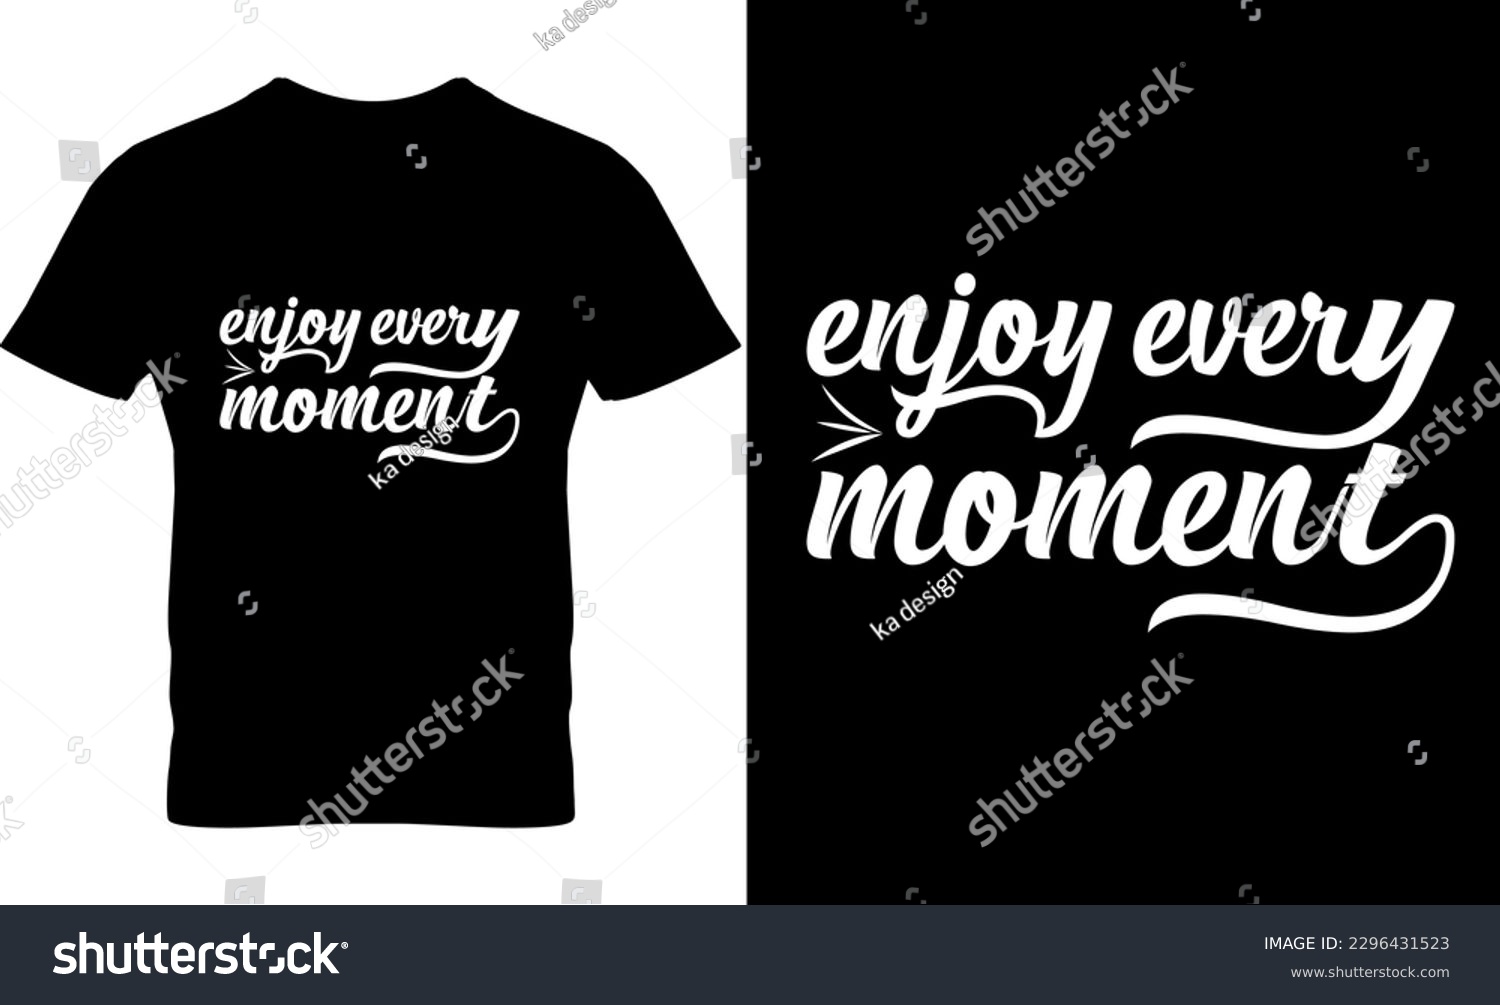 SVG of enjoy every moment, Graphic, illustration, vector, typography, motivational, inspiration, inspiration t-shirt design, Typography t-shirt design, motivational quotes, motivational t-shirt design, svg